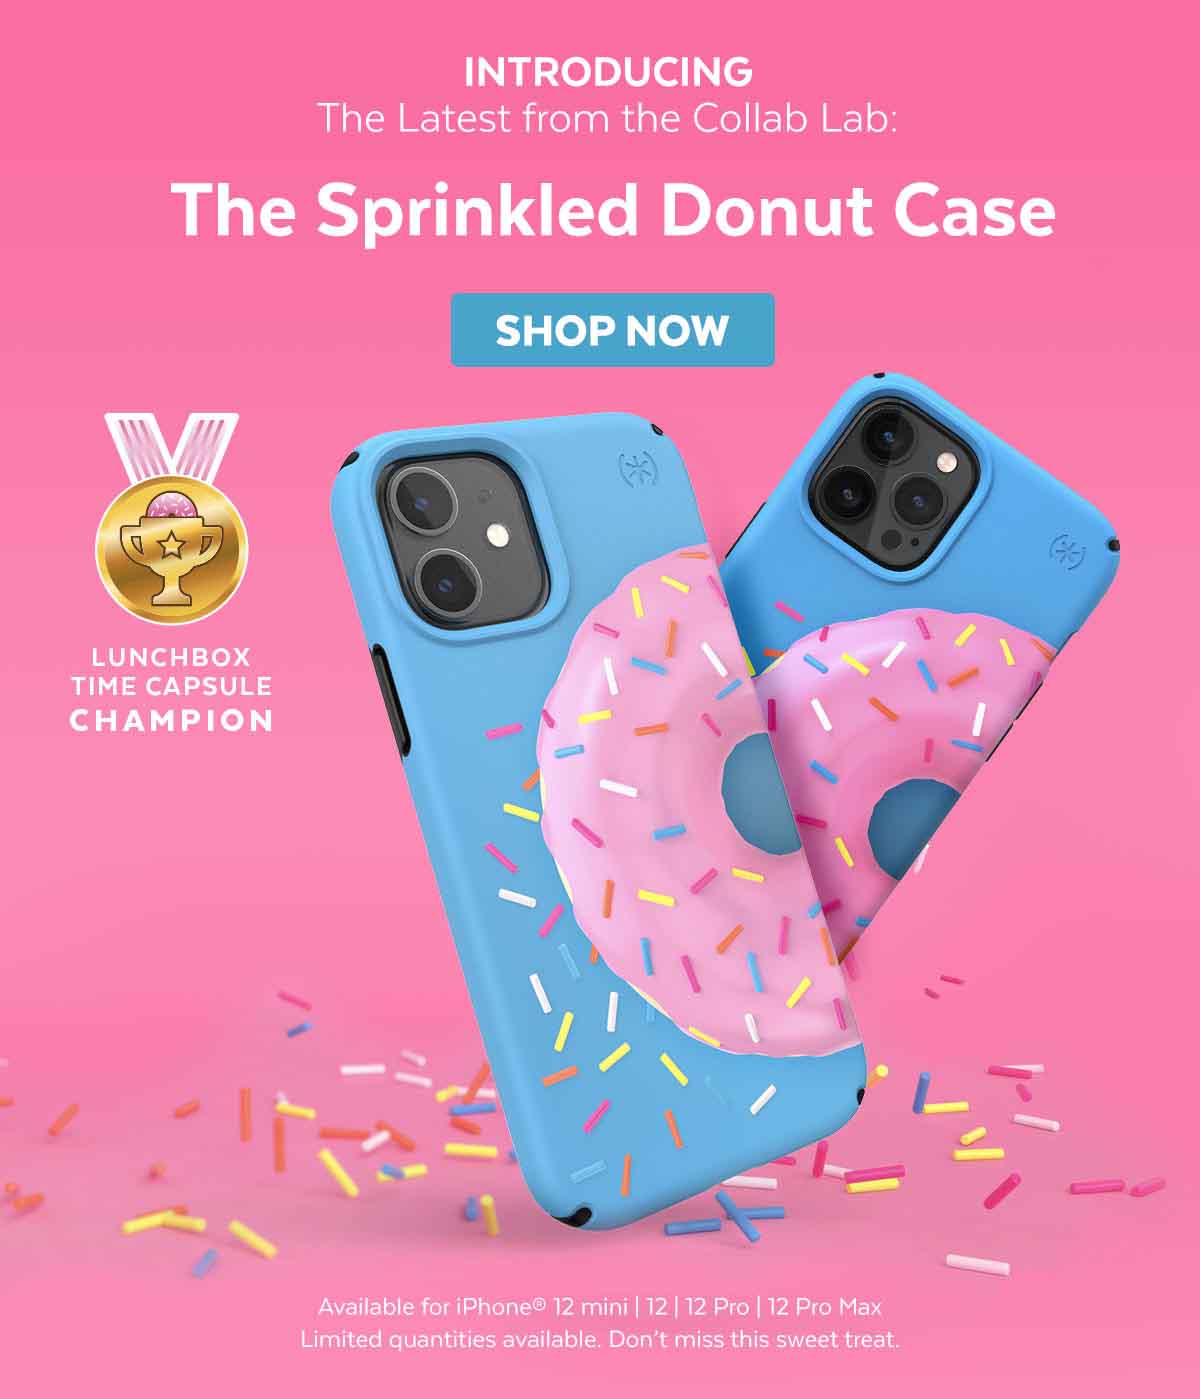 Introducing the latest from the Collab Lab: The Sprinkled Donut Case-the Lunchbox Time Capsule Champion. Available for iPhone 12, 12 mini, 12 Pro, and 12 Pro Max. Shop now.